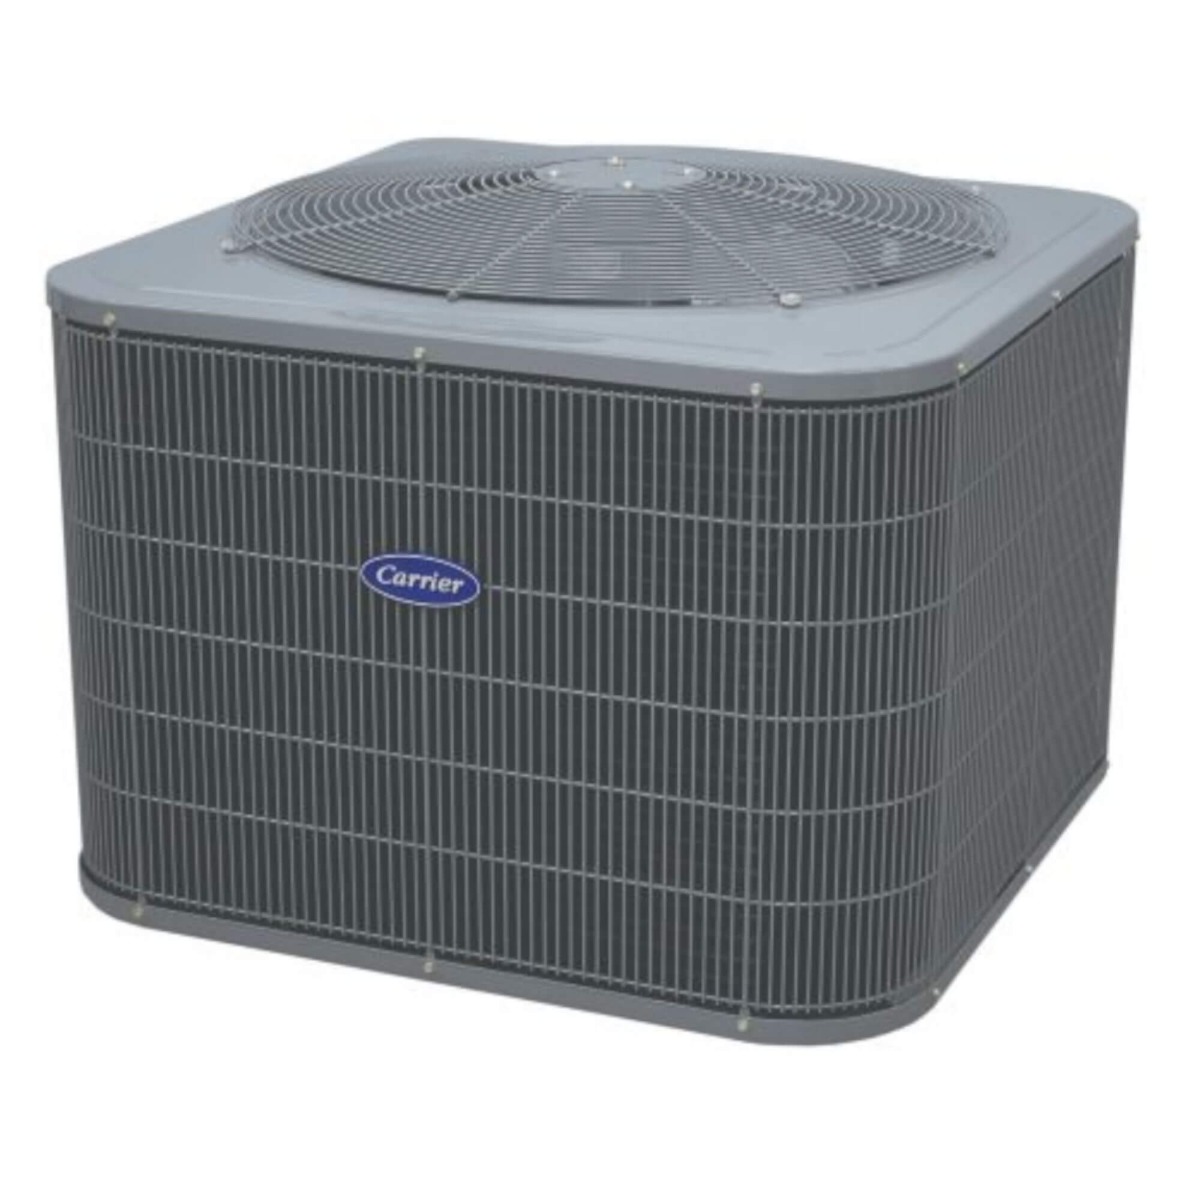 Carrier Up to 15 SEER2 Residential Air Conditioner Condensing Unit|24SCA530